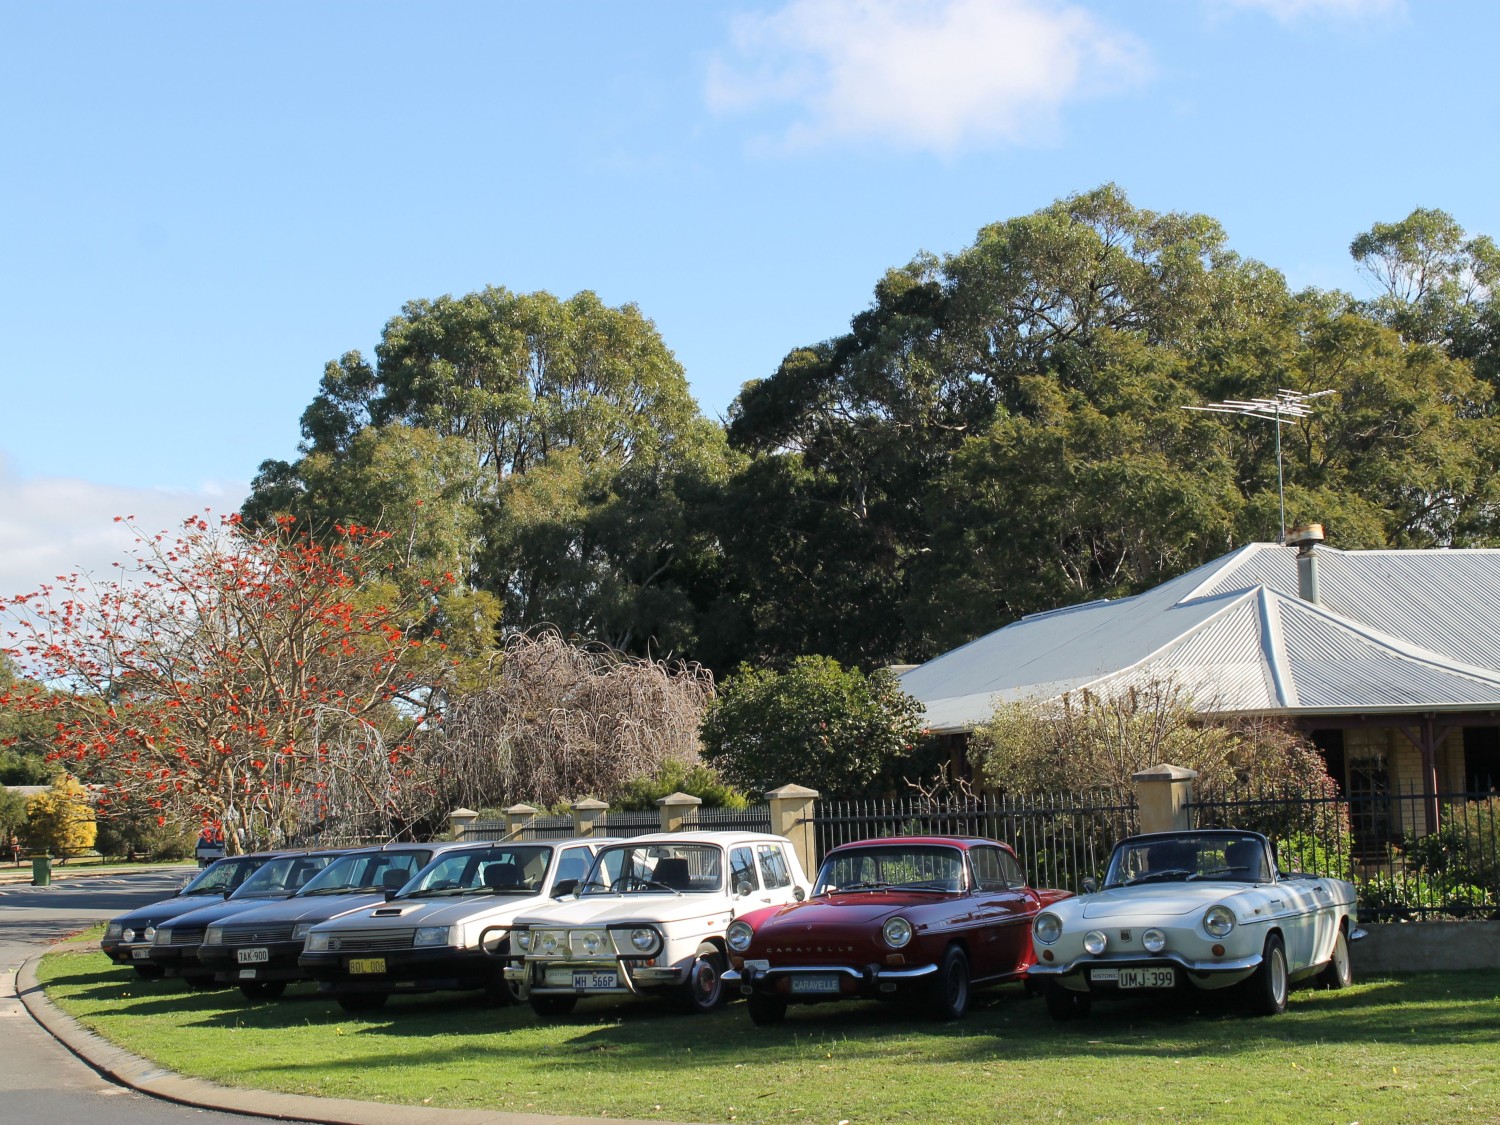 1964 Renault 60's to 90 - SydMid - Shannons Club